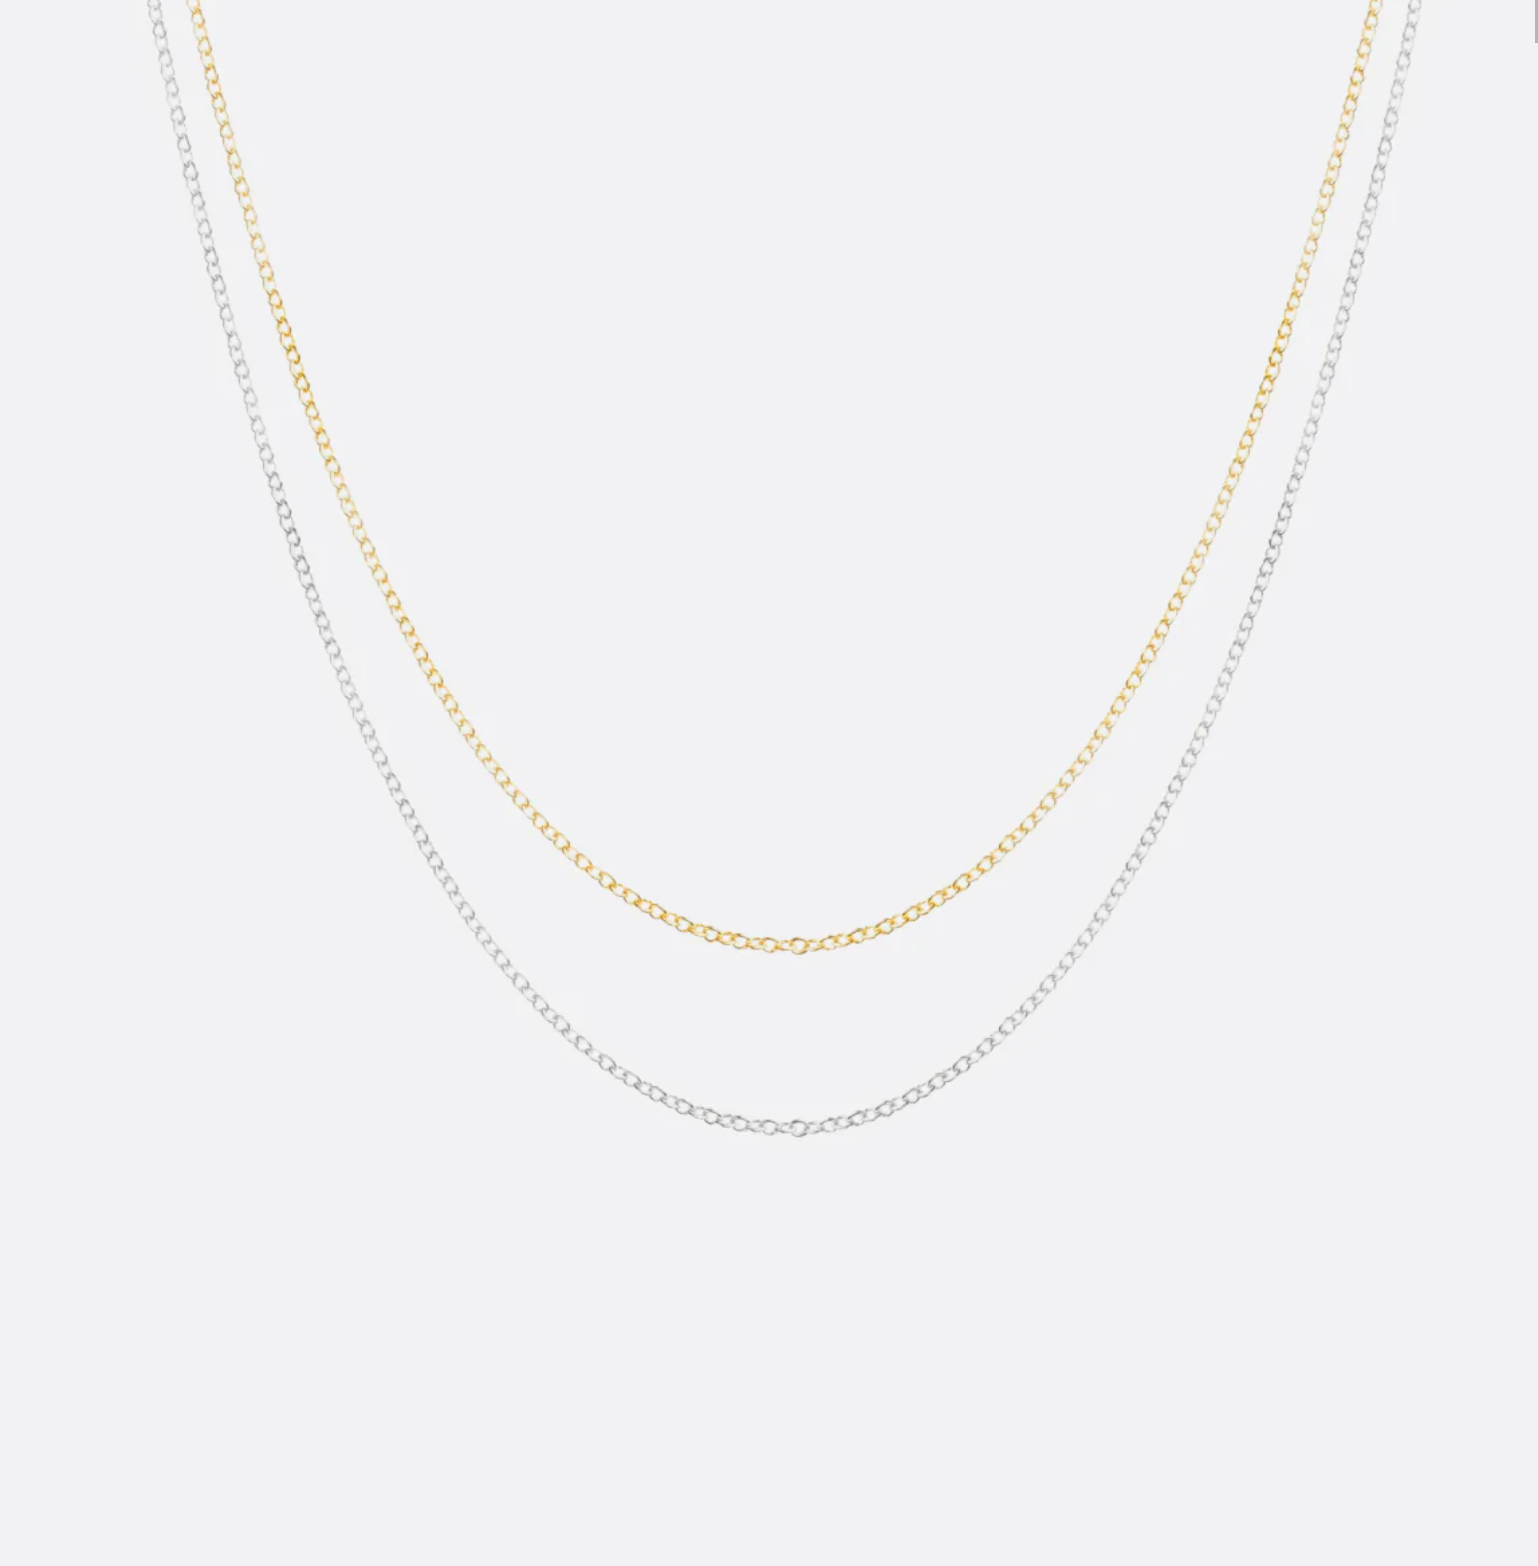 Sample Sale - Classic Dainty Chain in Sterling Silver or Gold Filled